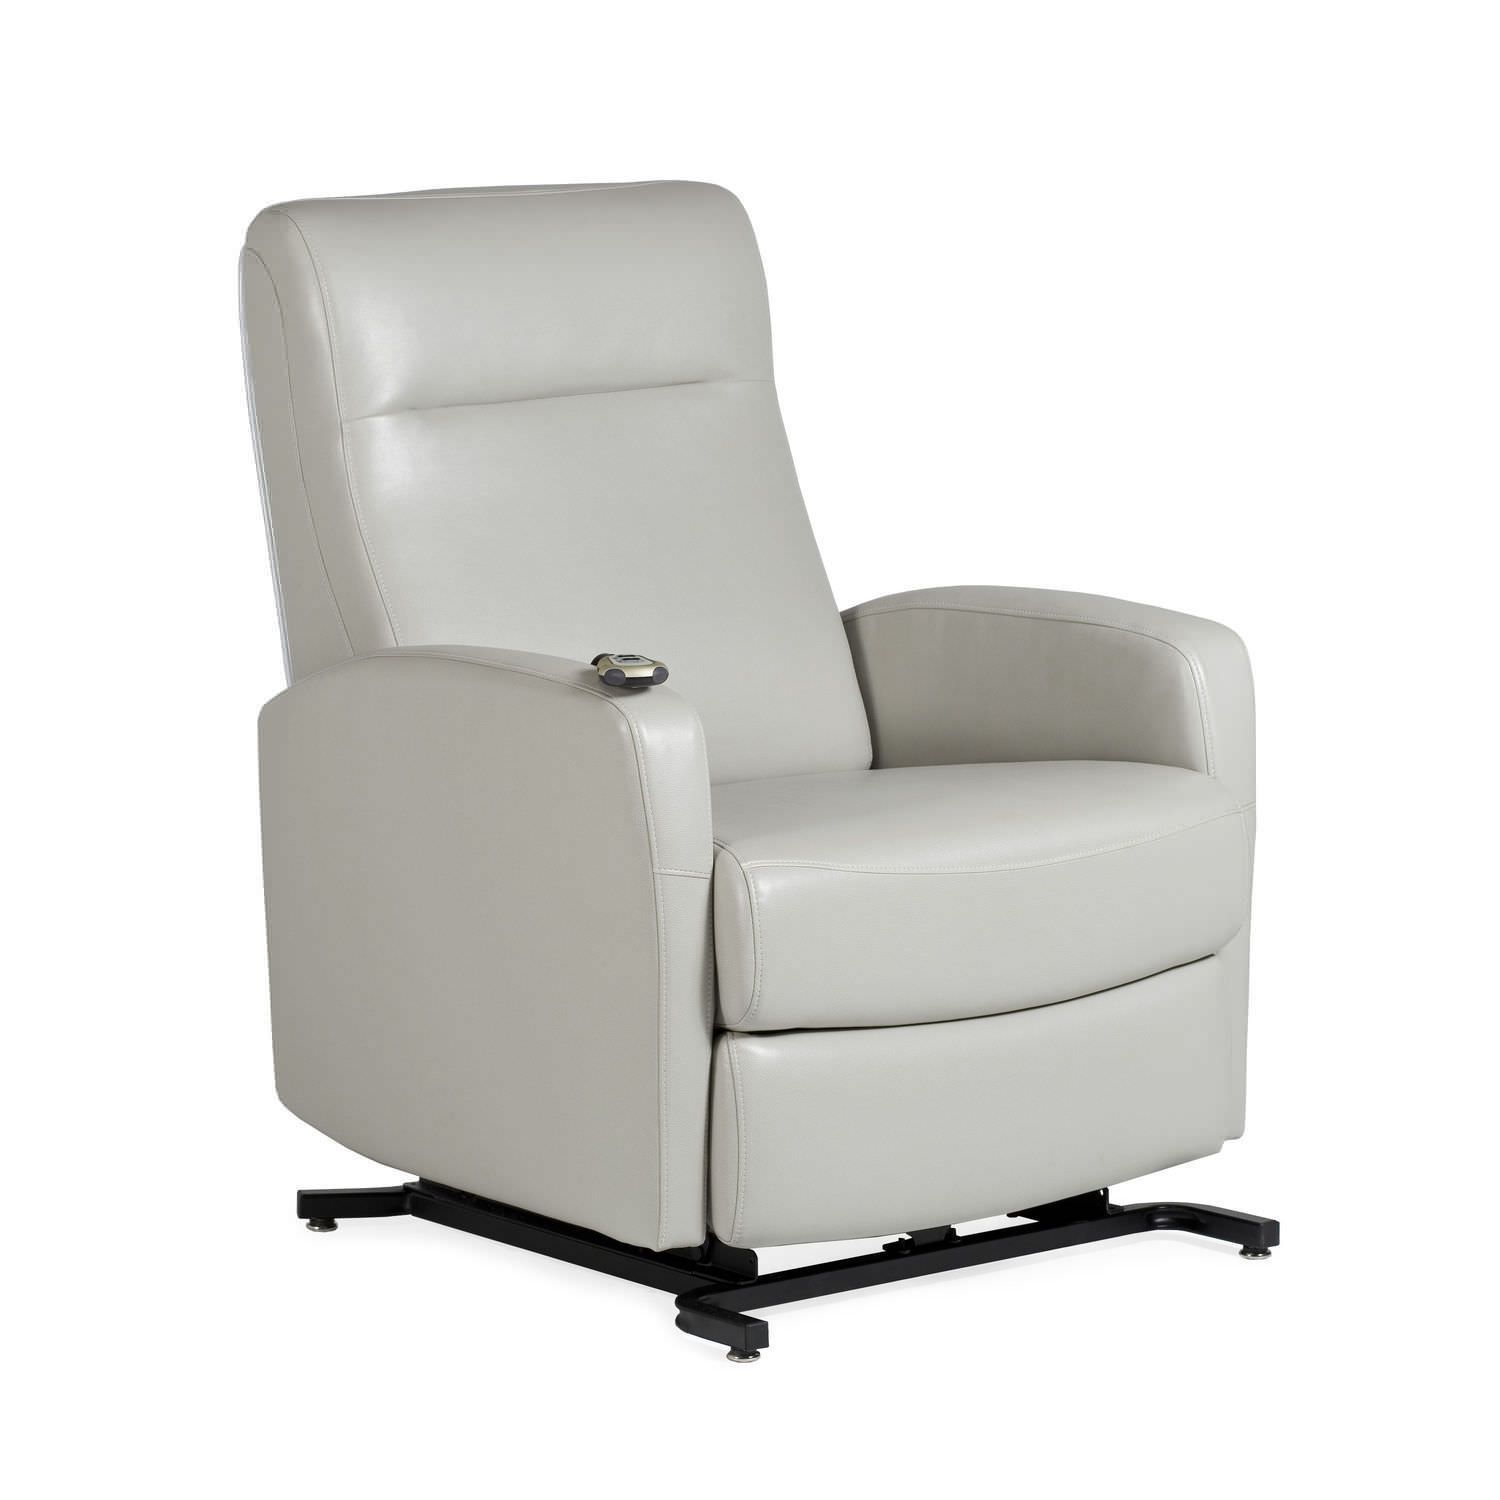 Reclining medical sleeper chair / with legrest / lifting / electrical K-Komfort K9L04 Knú Healthcare